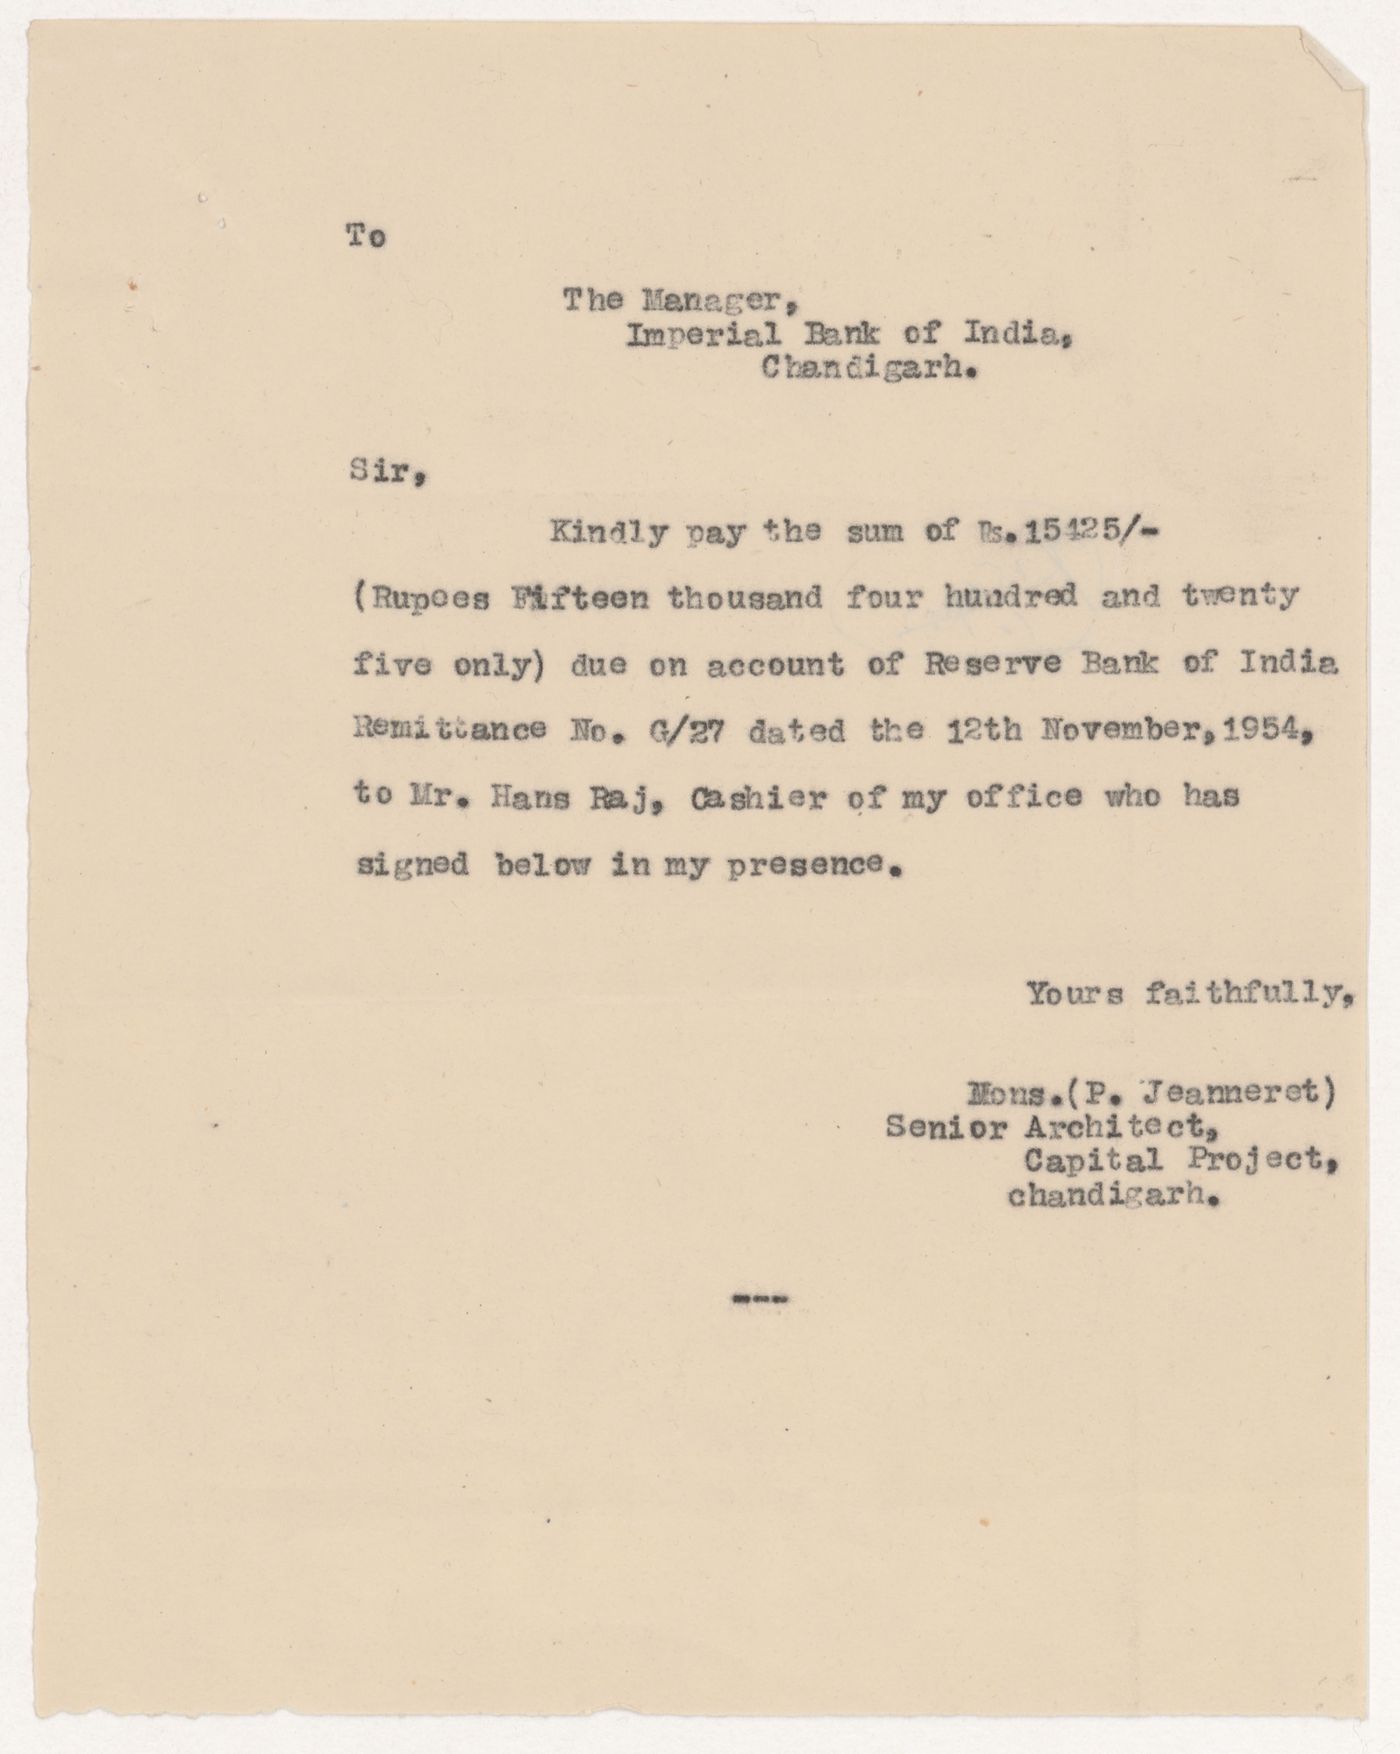 Letter from Pierre Jeanneret to the manager of the Imperial Bank of India, in Chandigarh, India